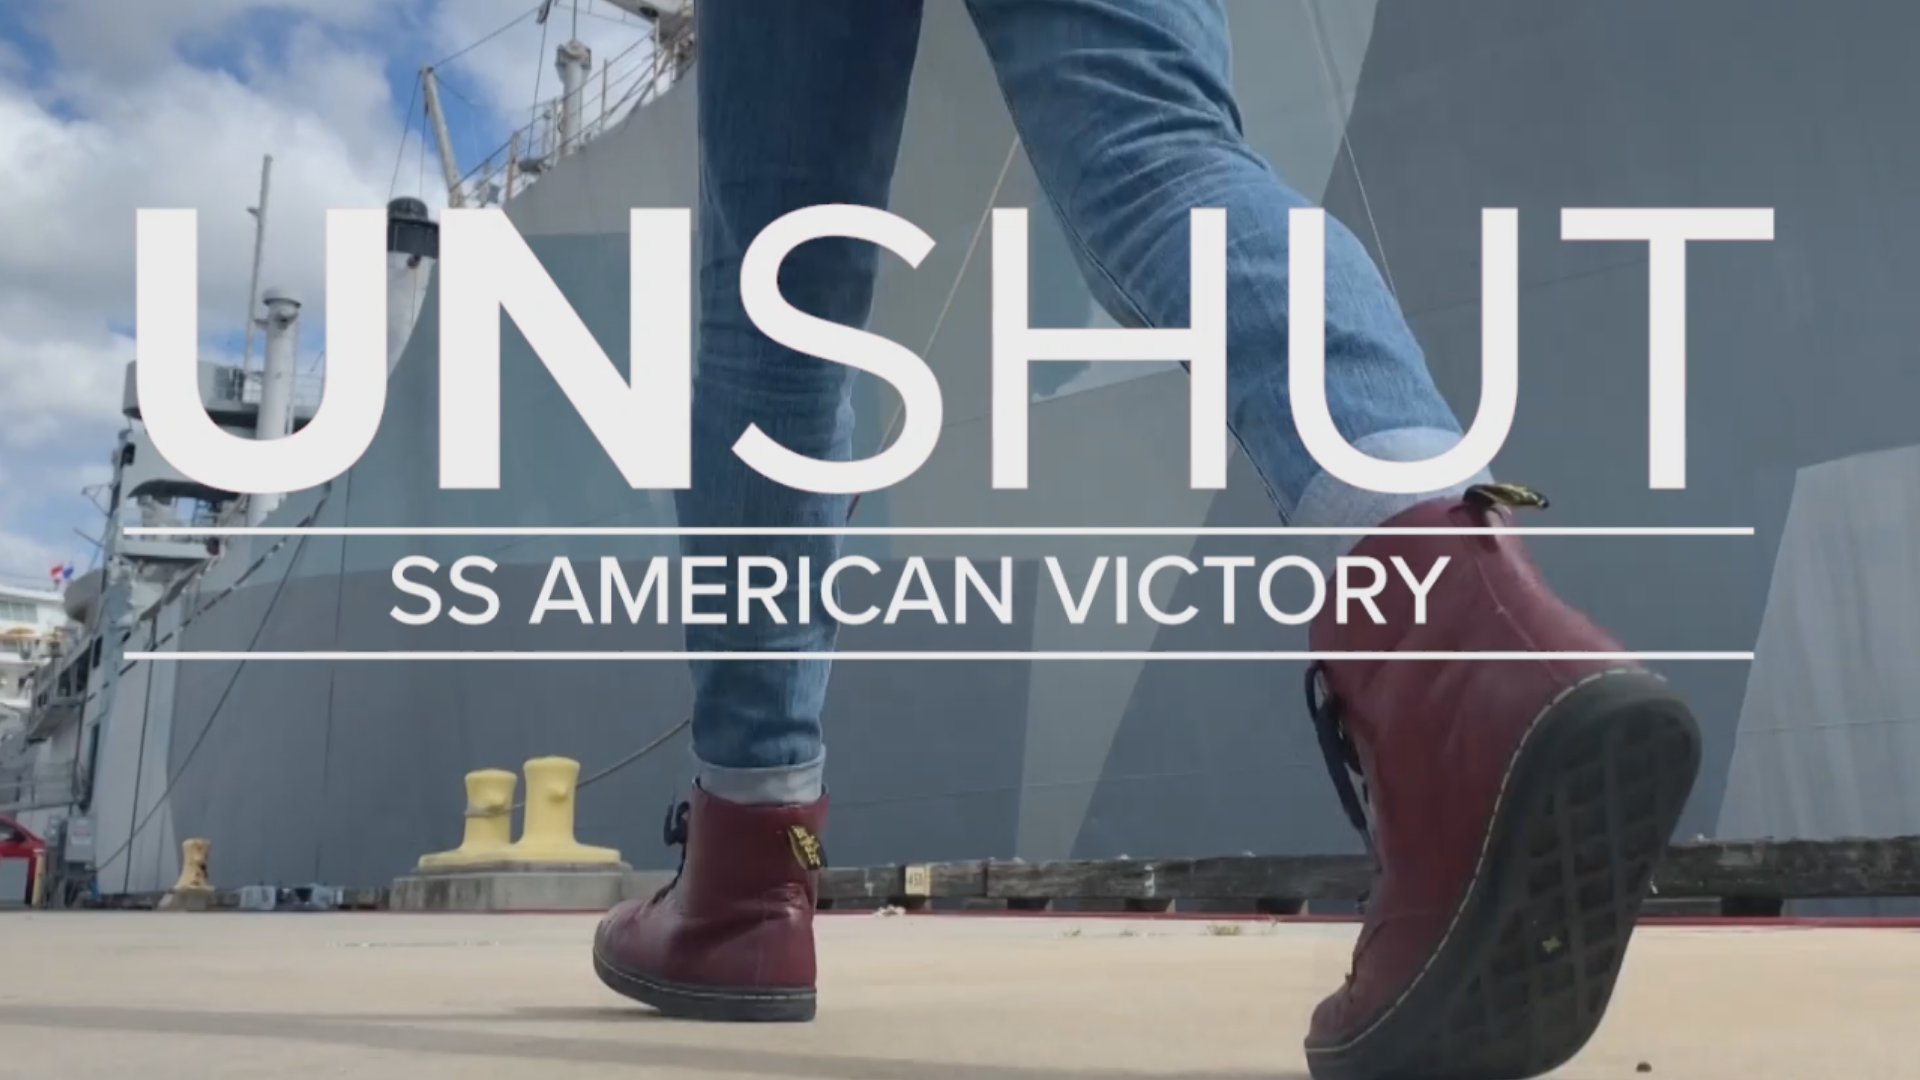 UnShut - A new series where 10News Digital unlocks doors you just can't get into. In this episode, we get access to restricted areas aboard the SS American Victory.